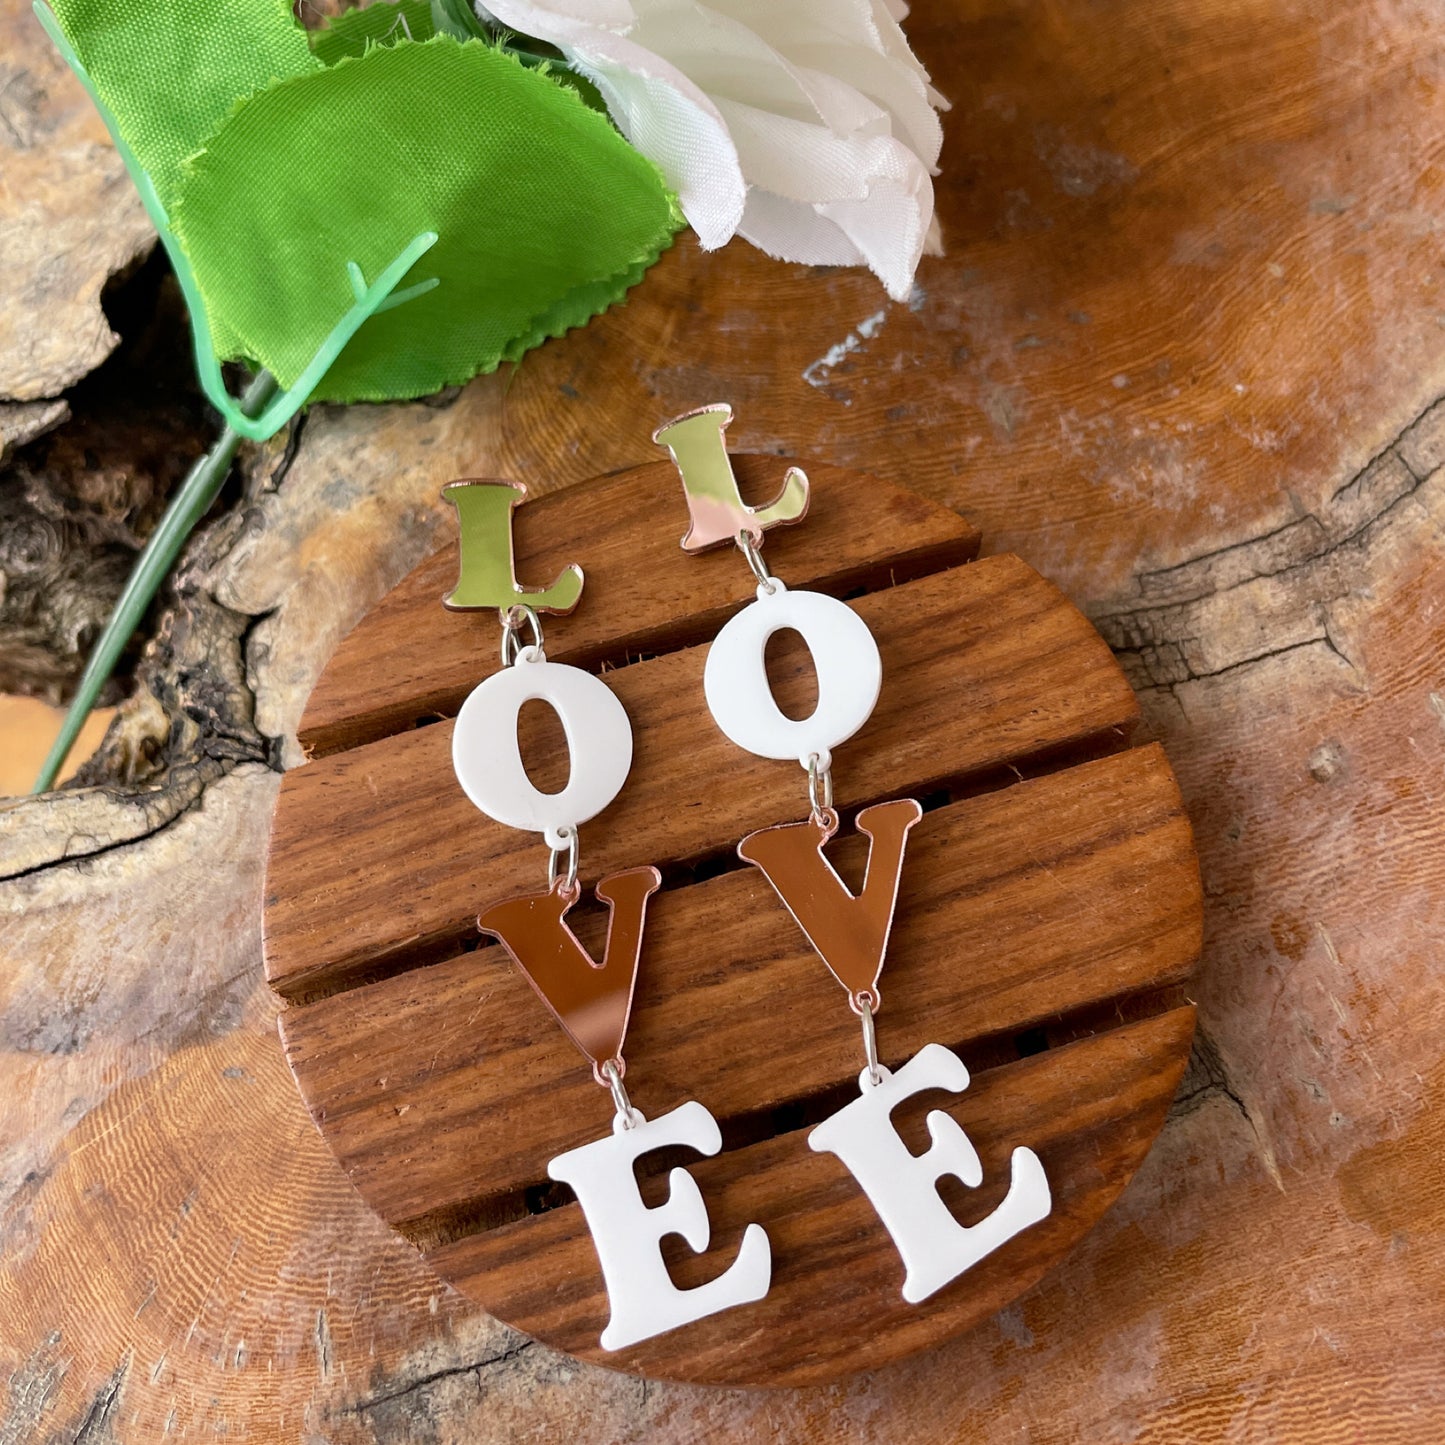 Rosegold Love Earrings - Rosegold and white colors - contains acrylic based four letters of "LOVE" - Nian by Nidhi - in a white, green, and brown background